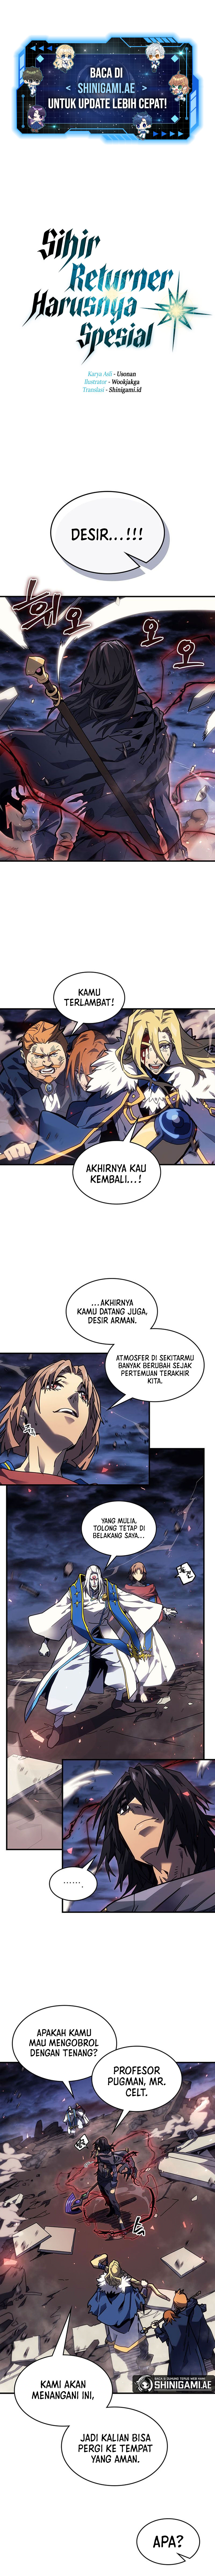 a-returners-magic-should-be-special-indo Chapter 249